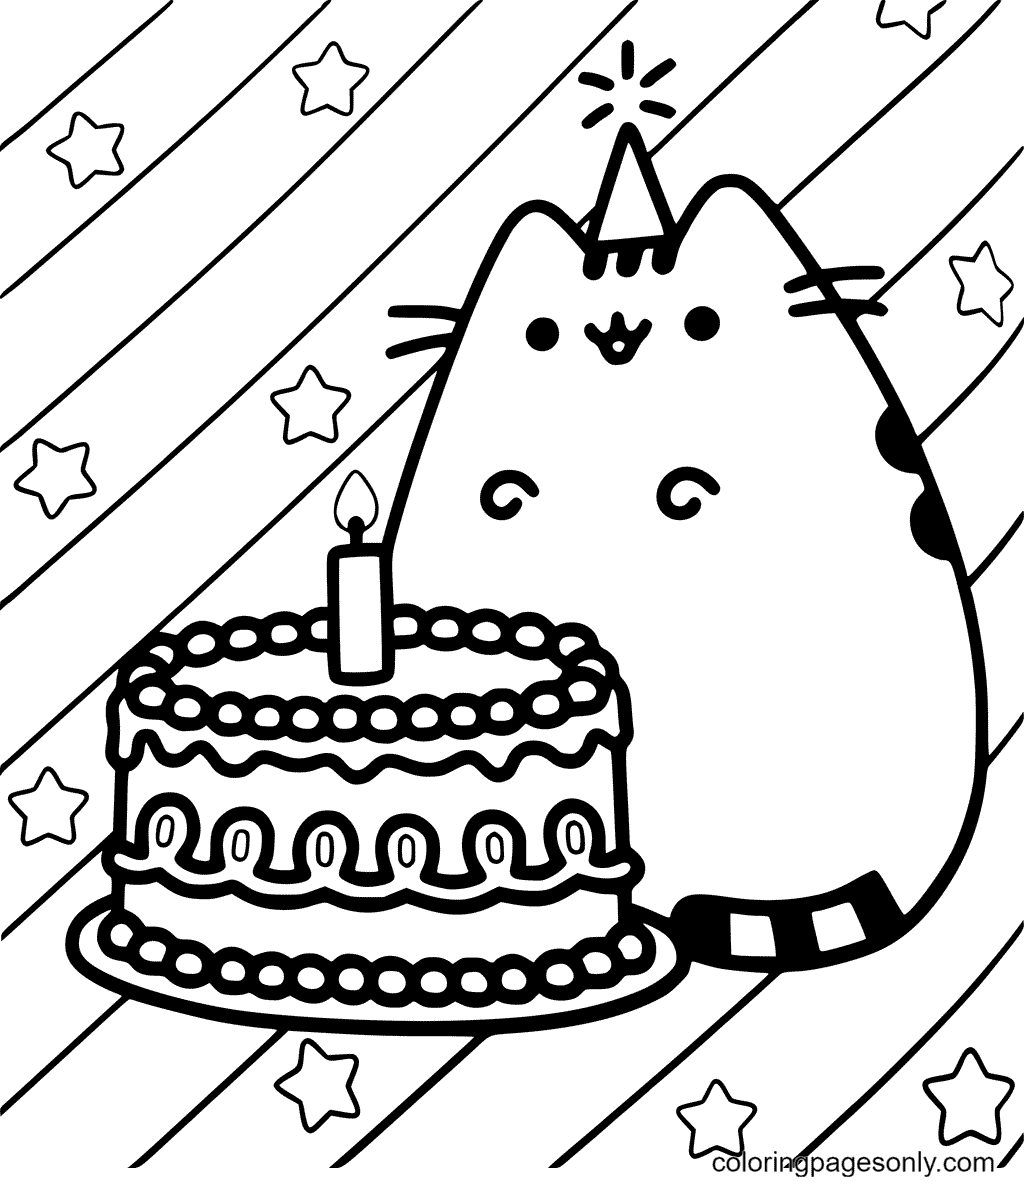 pusheen-happy-birthday-coloring-pages-pusheen-coloring-pages